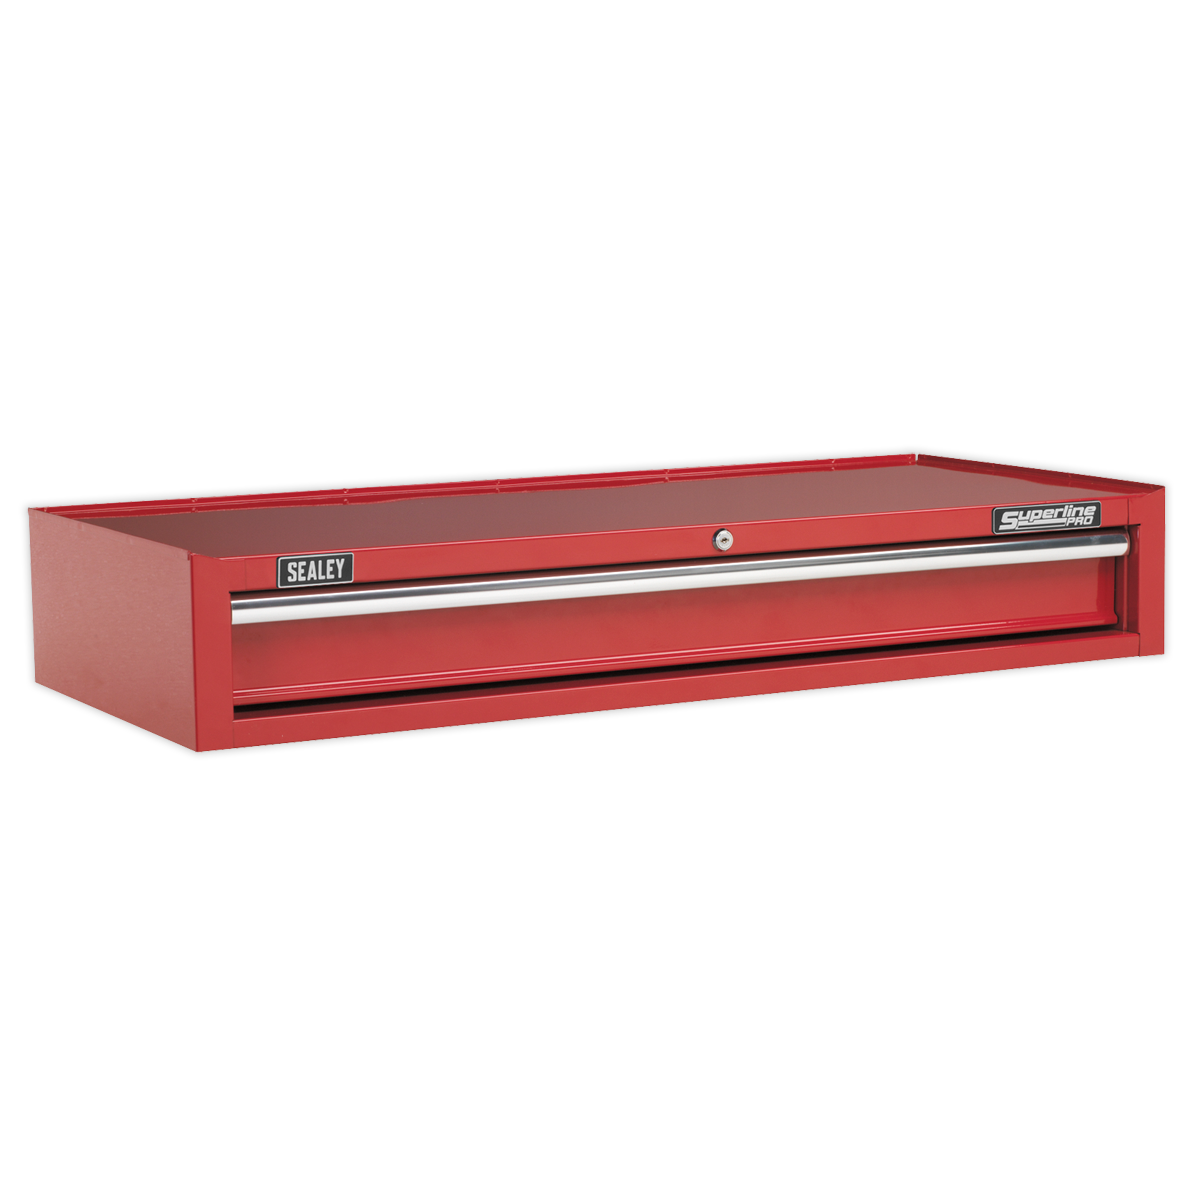 Sealey Mid-Box 1 Drawer with Ball-Bearing Slides Heavy-Duty - Red